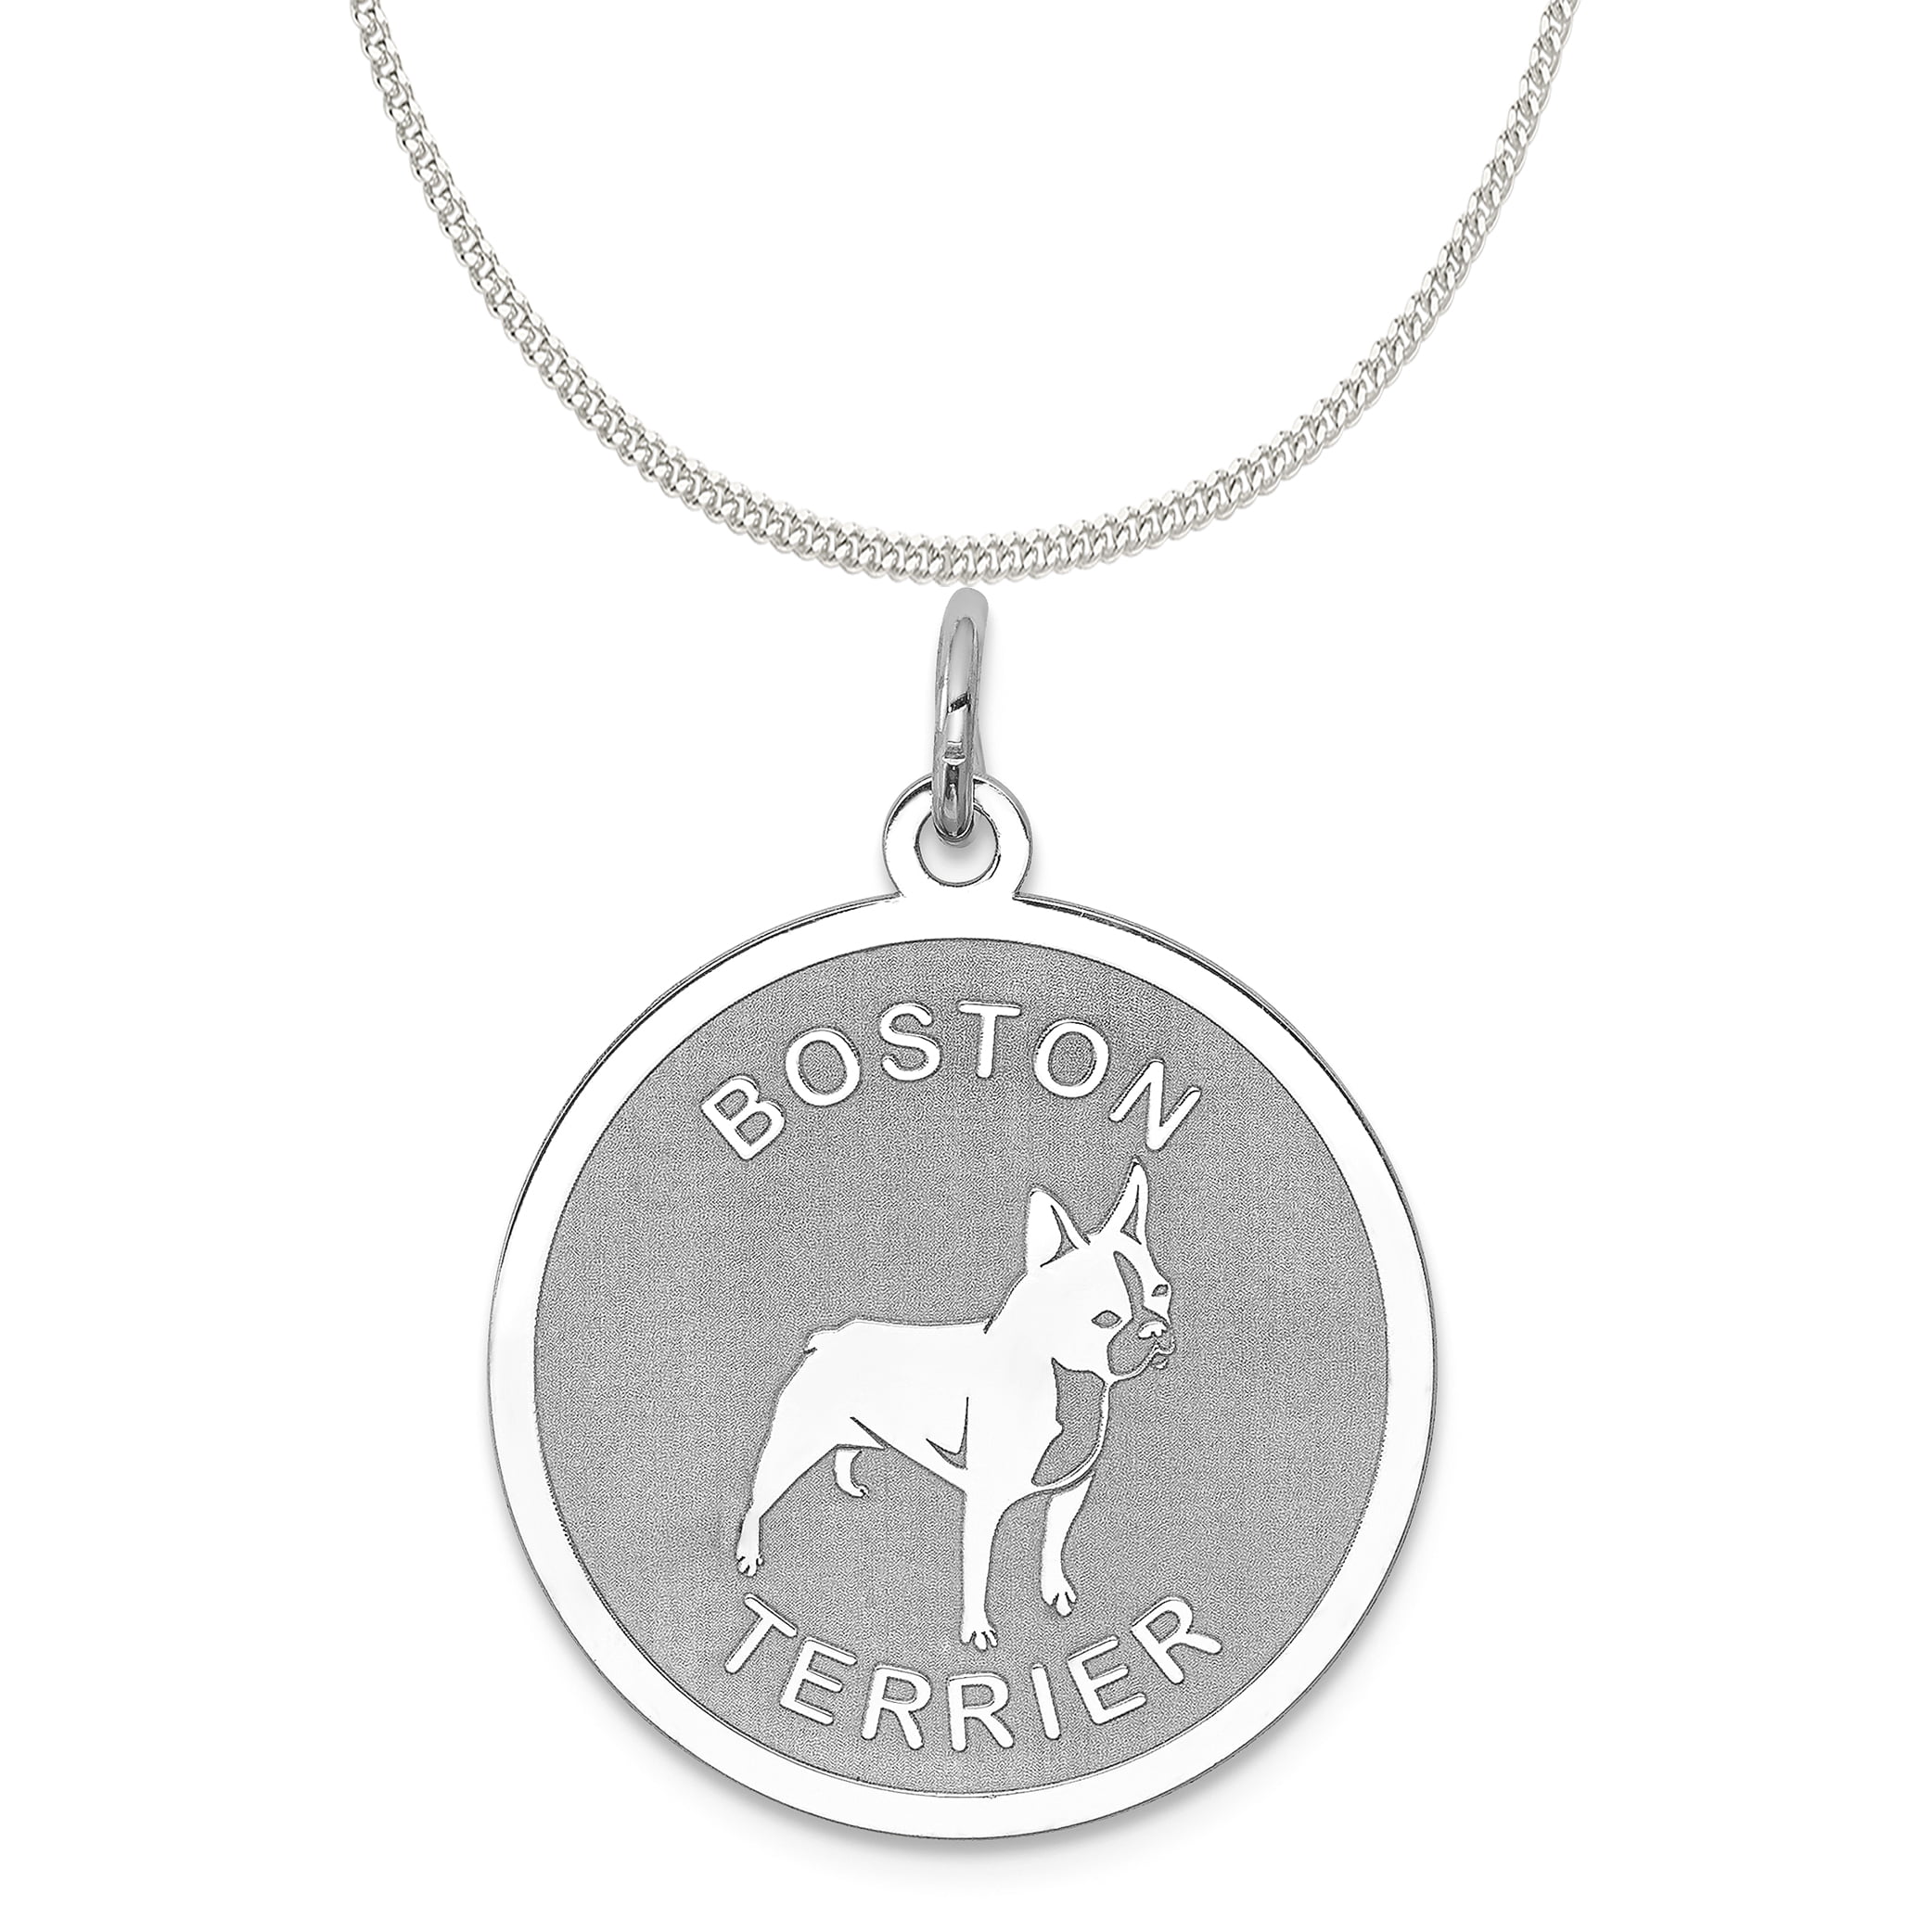 NEONBLOND Personalized Name Engraved Boston Vintage Dogtag Necklace